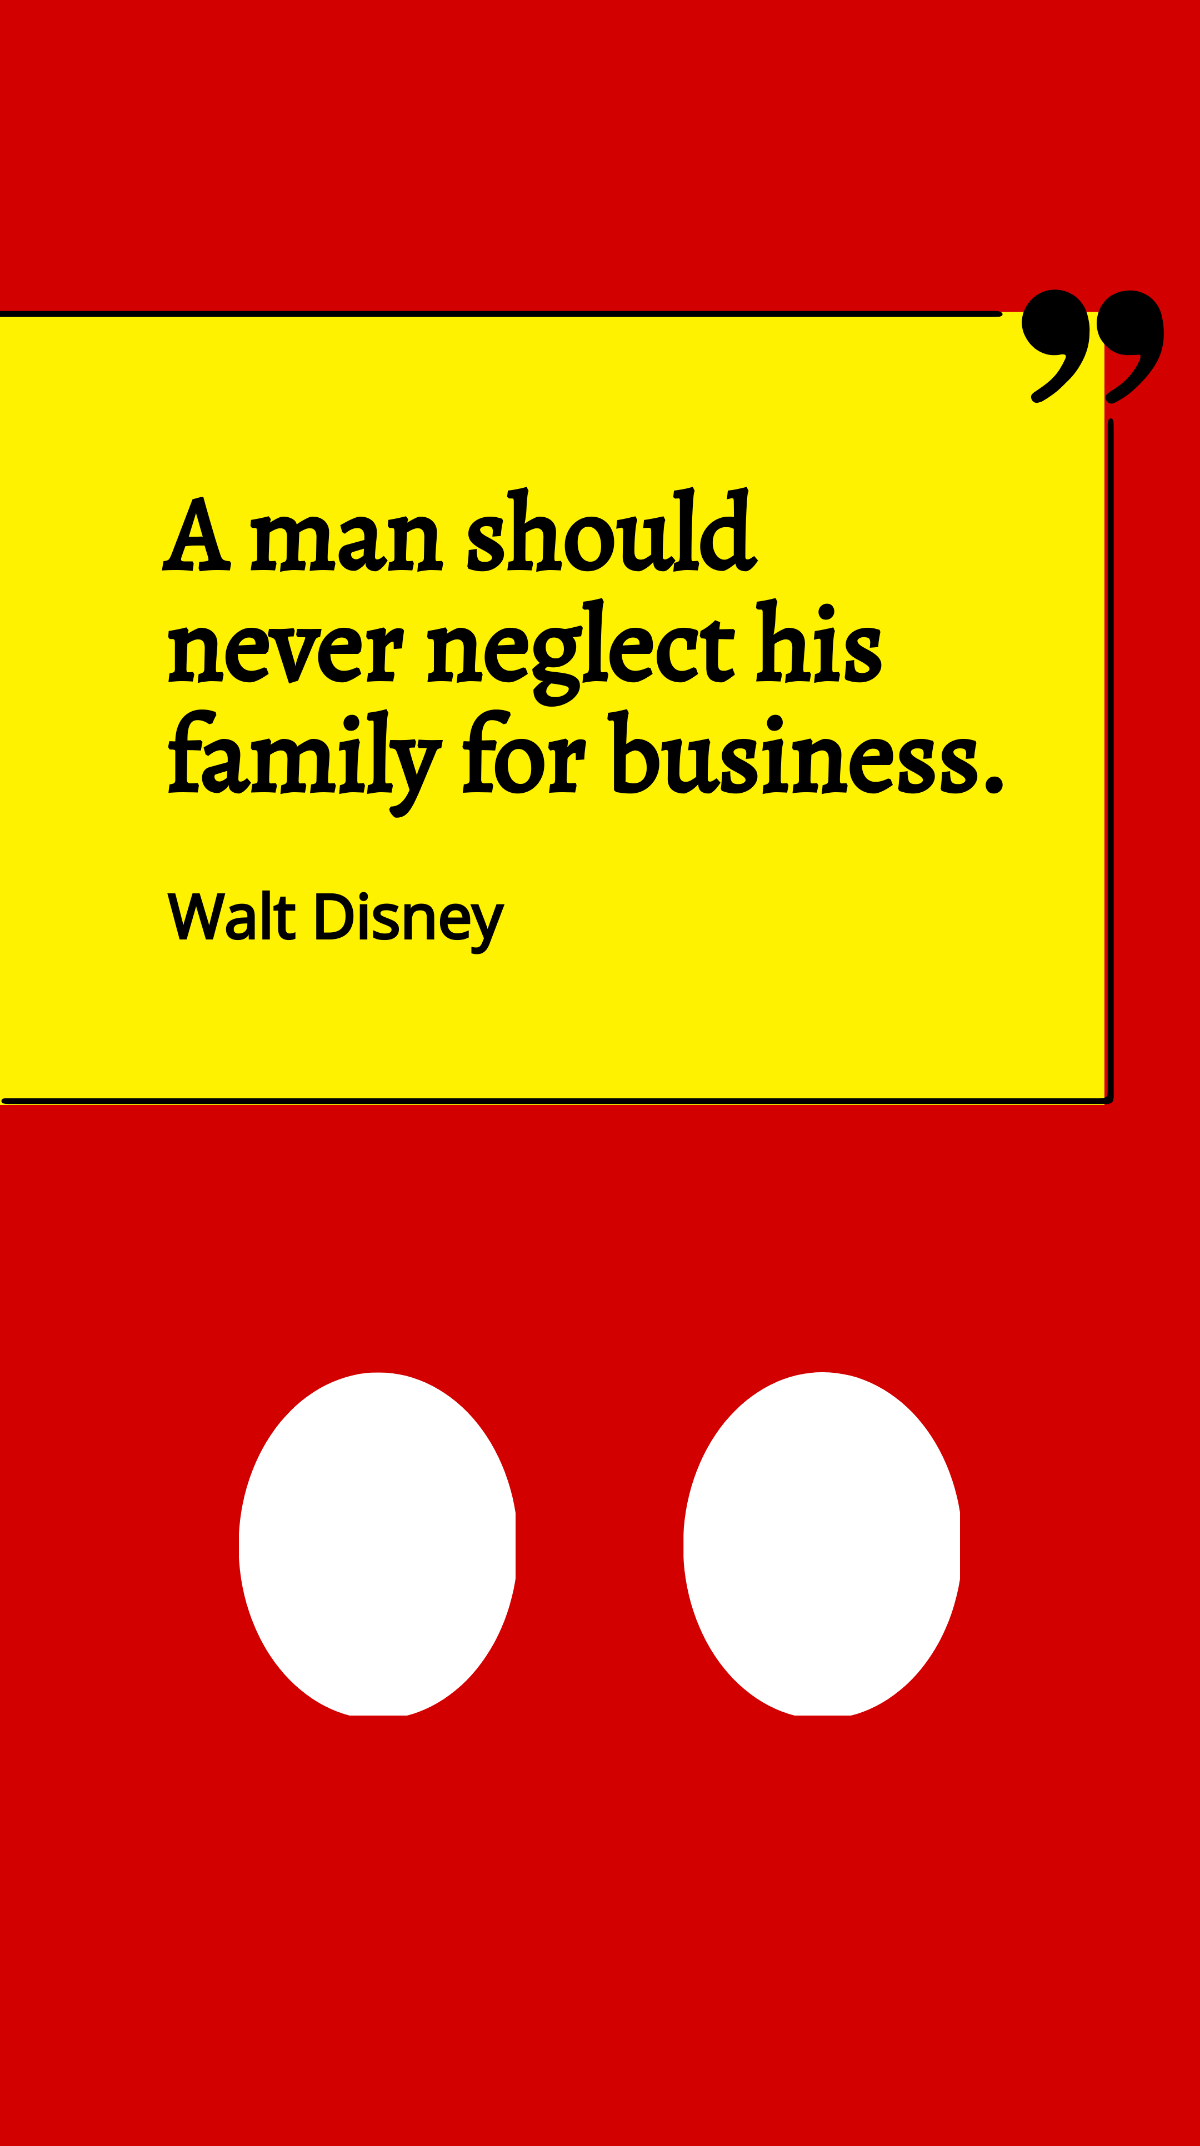 Walt Disney - A man should never neglect his family for business. Template